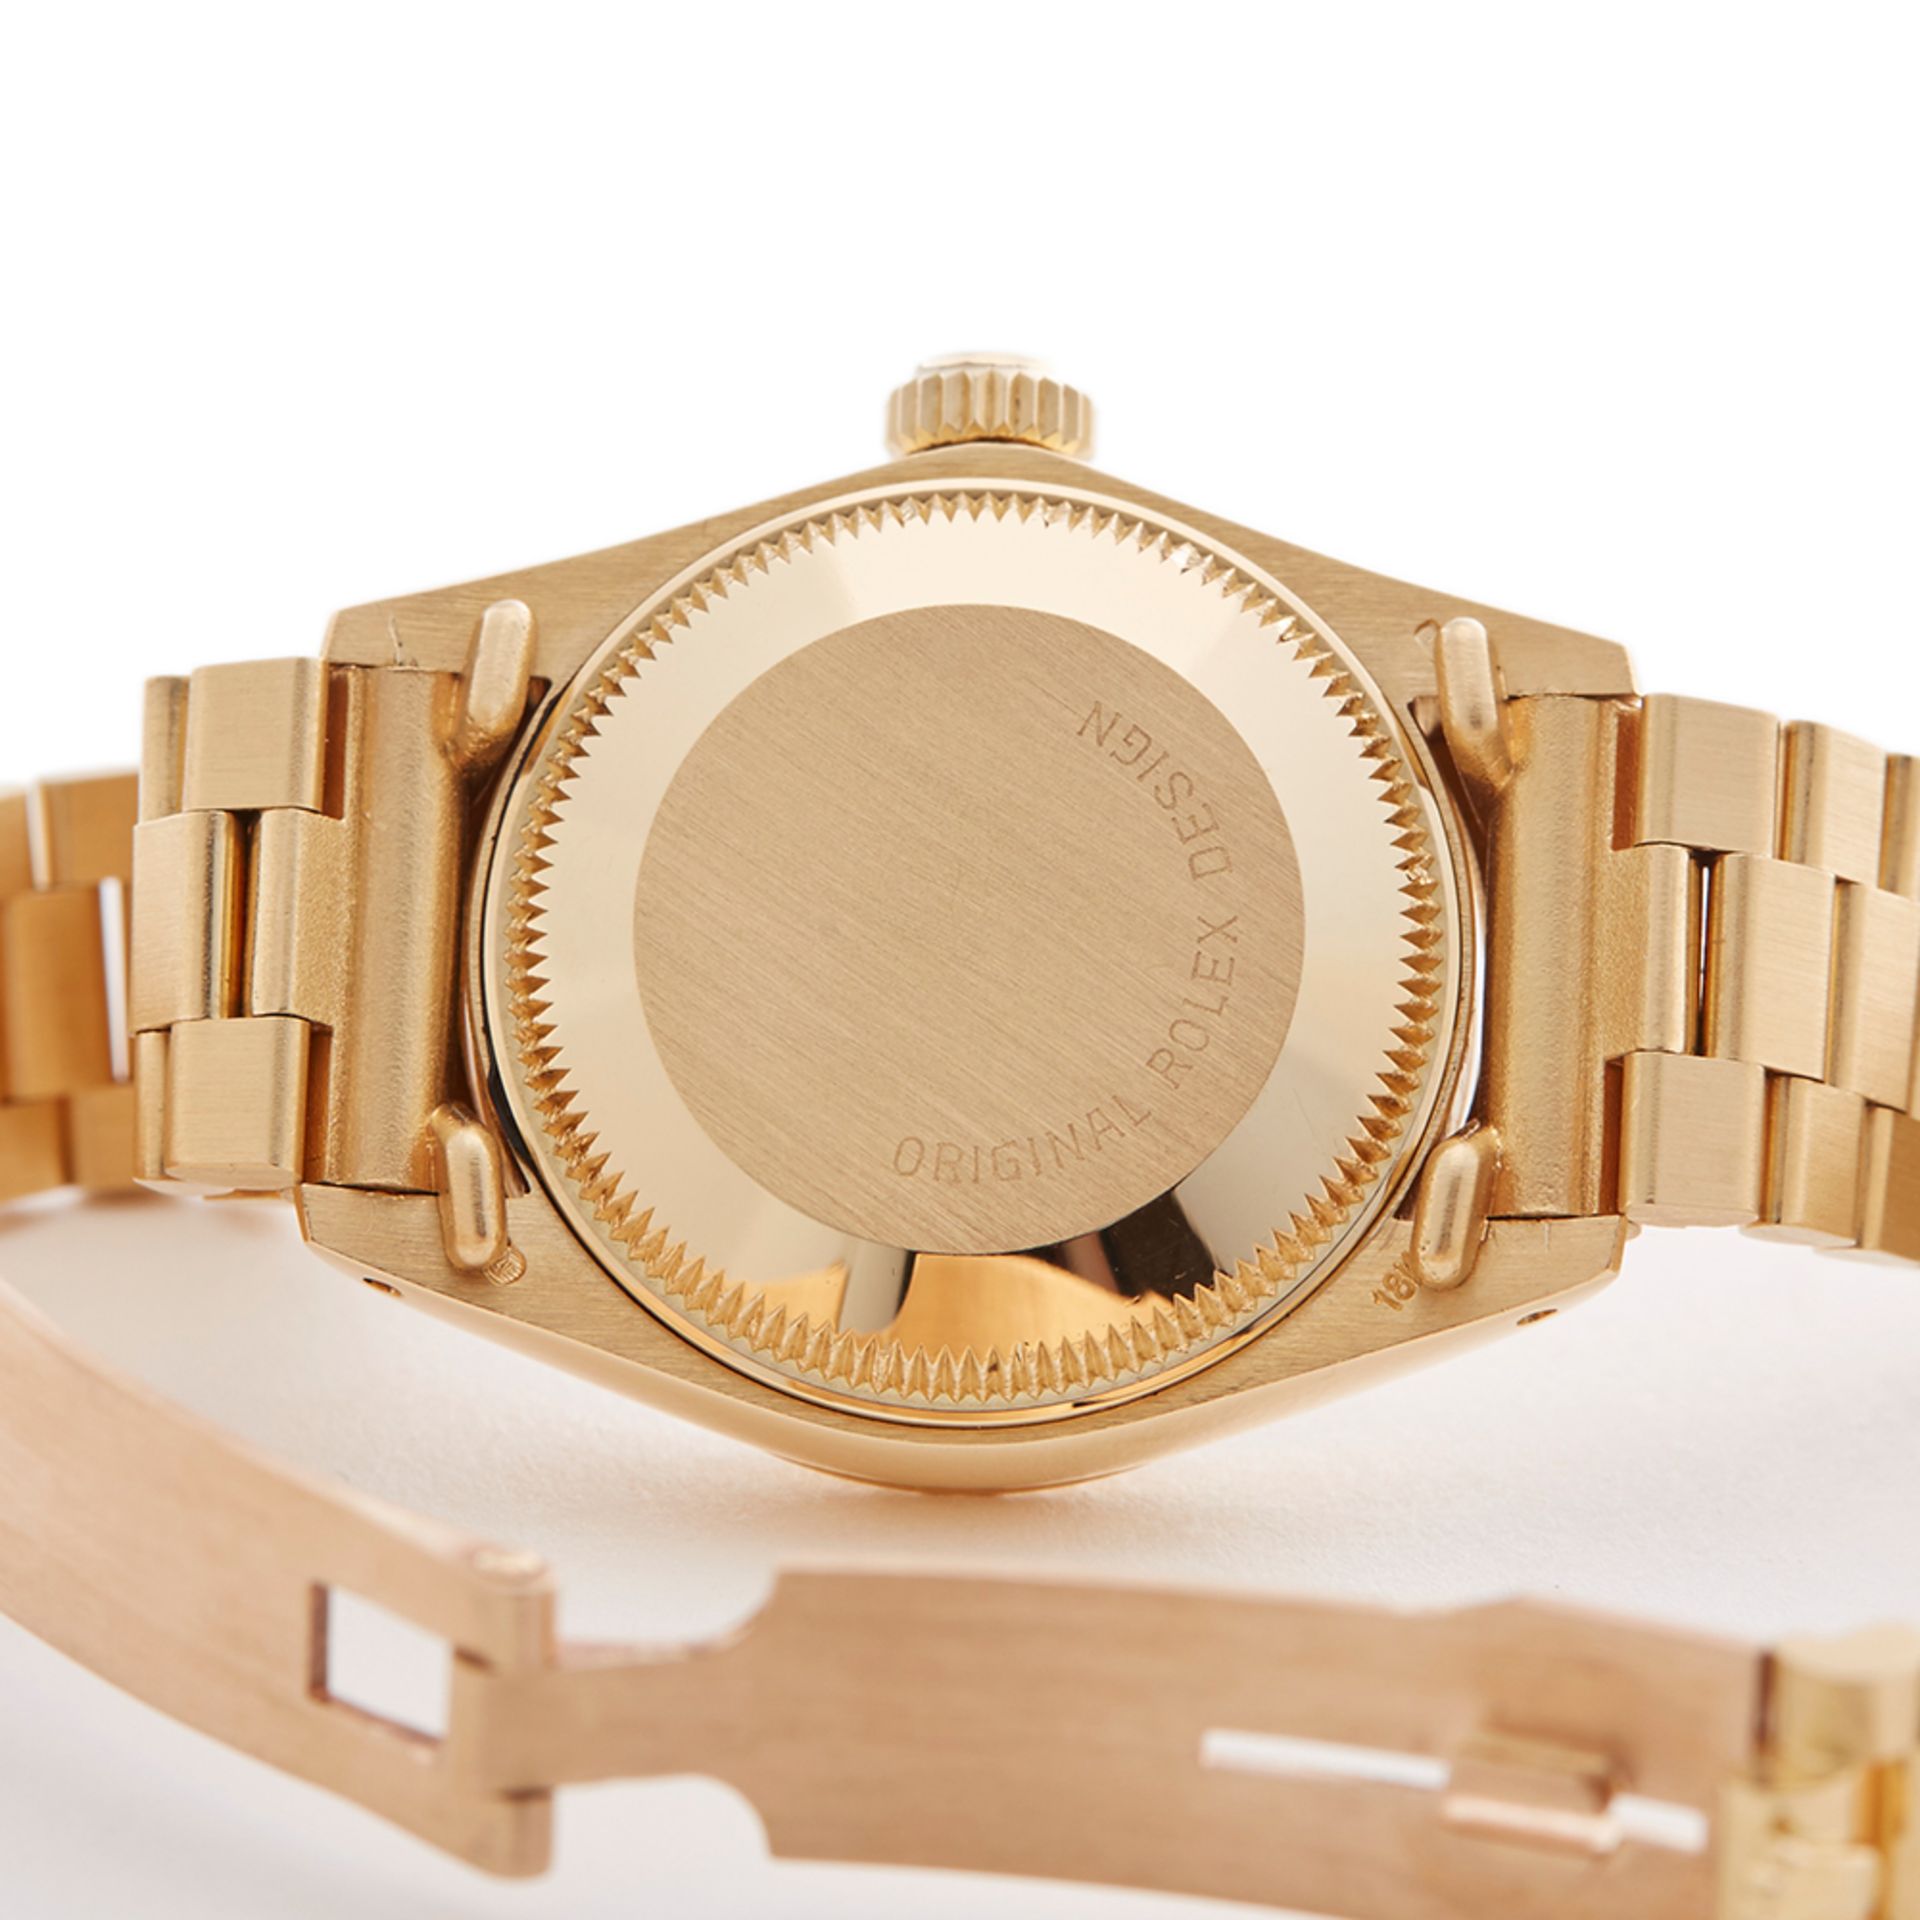 Rolex Datejust 26mm 18k Yellow Gold 6917 - Image 8 of 9